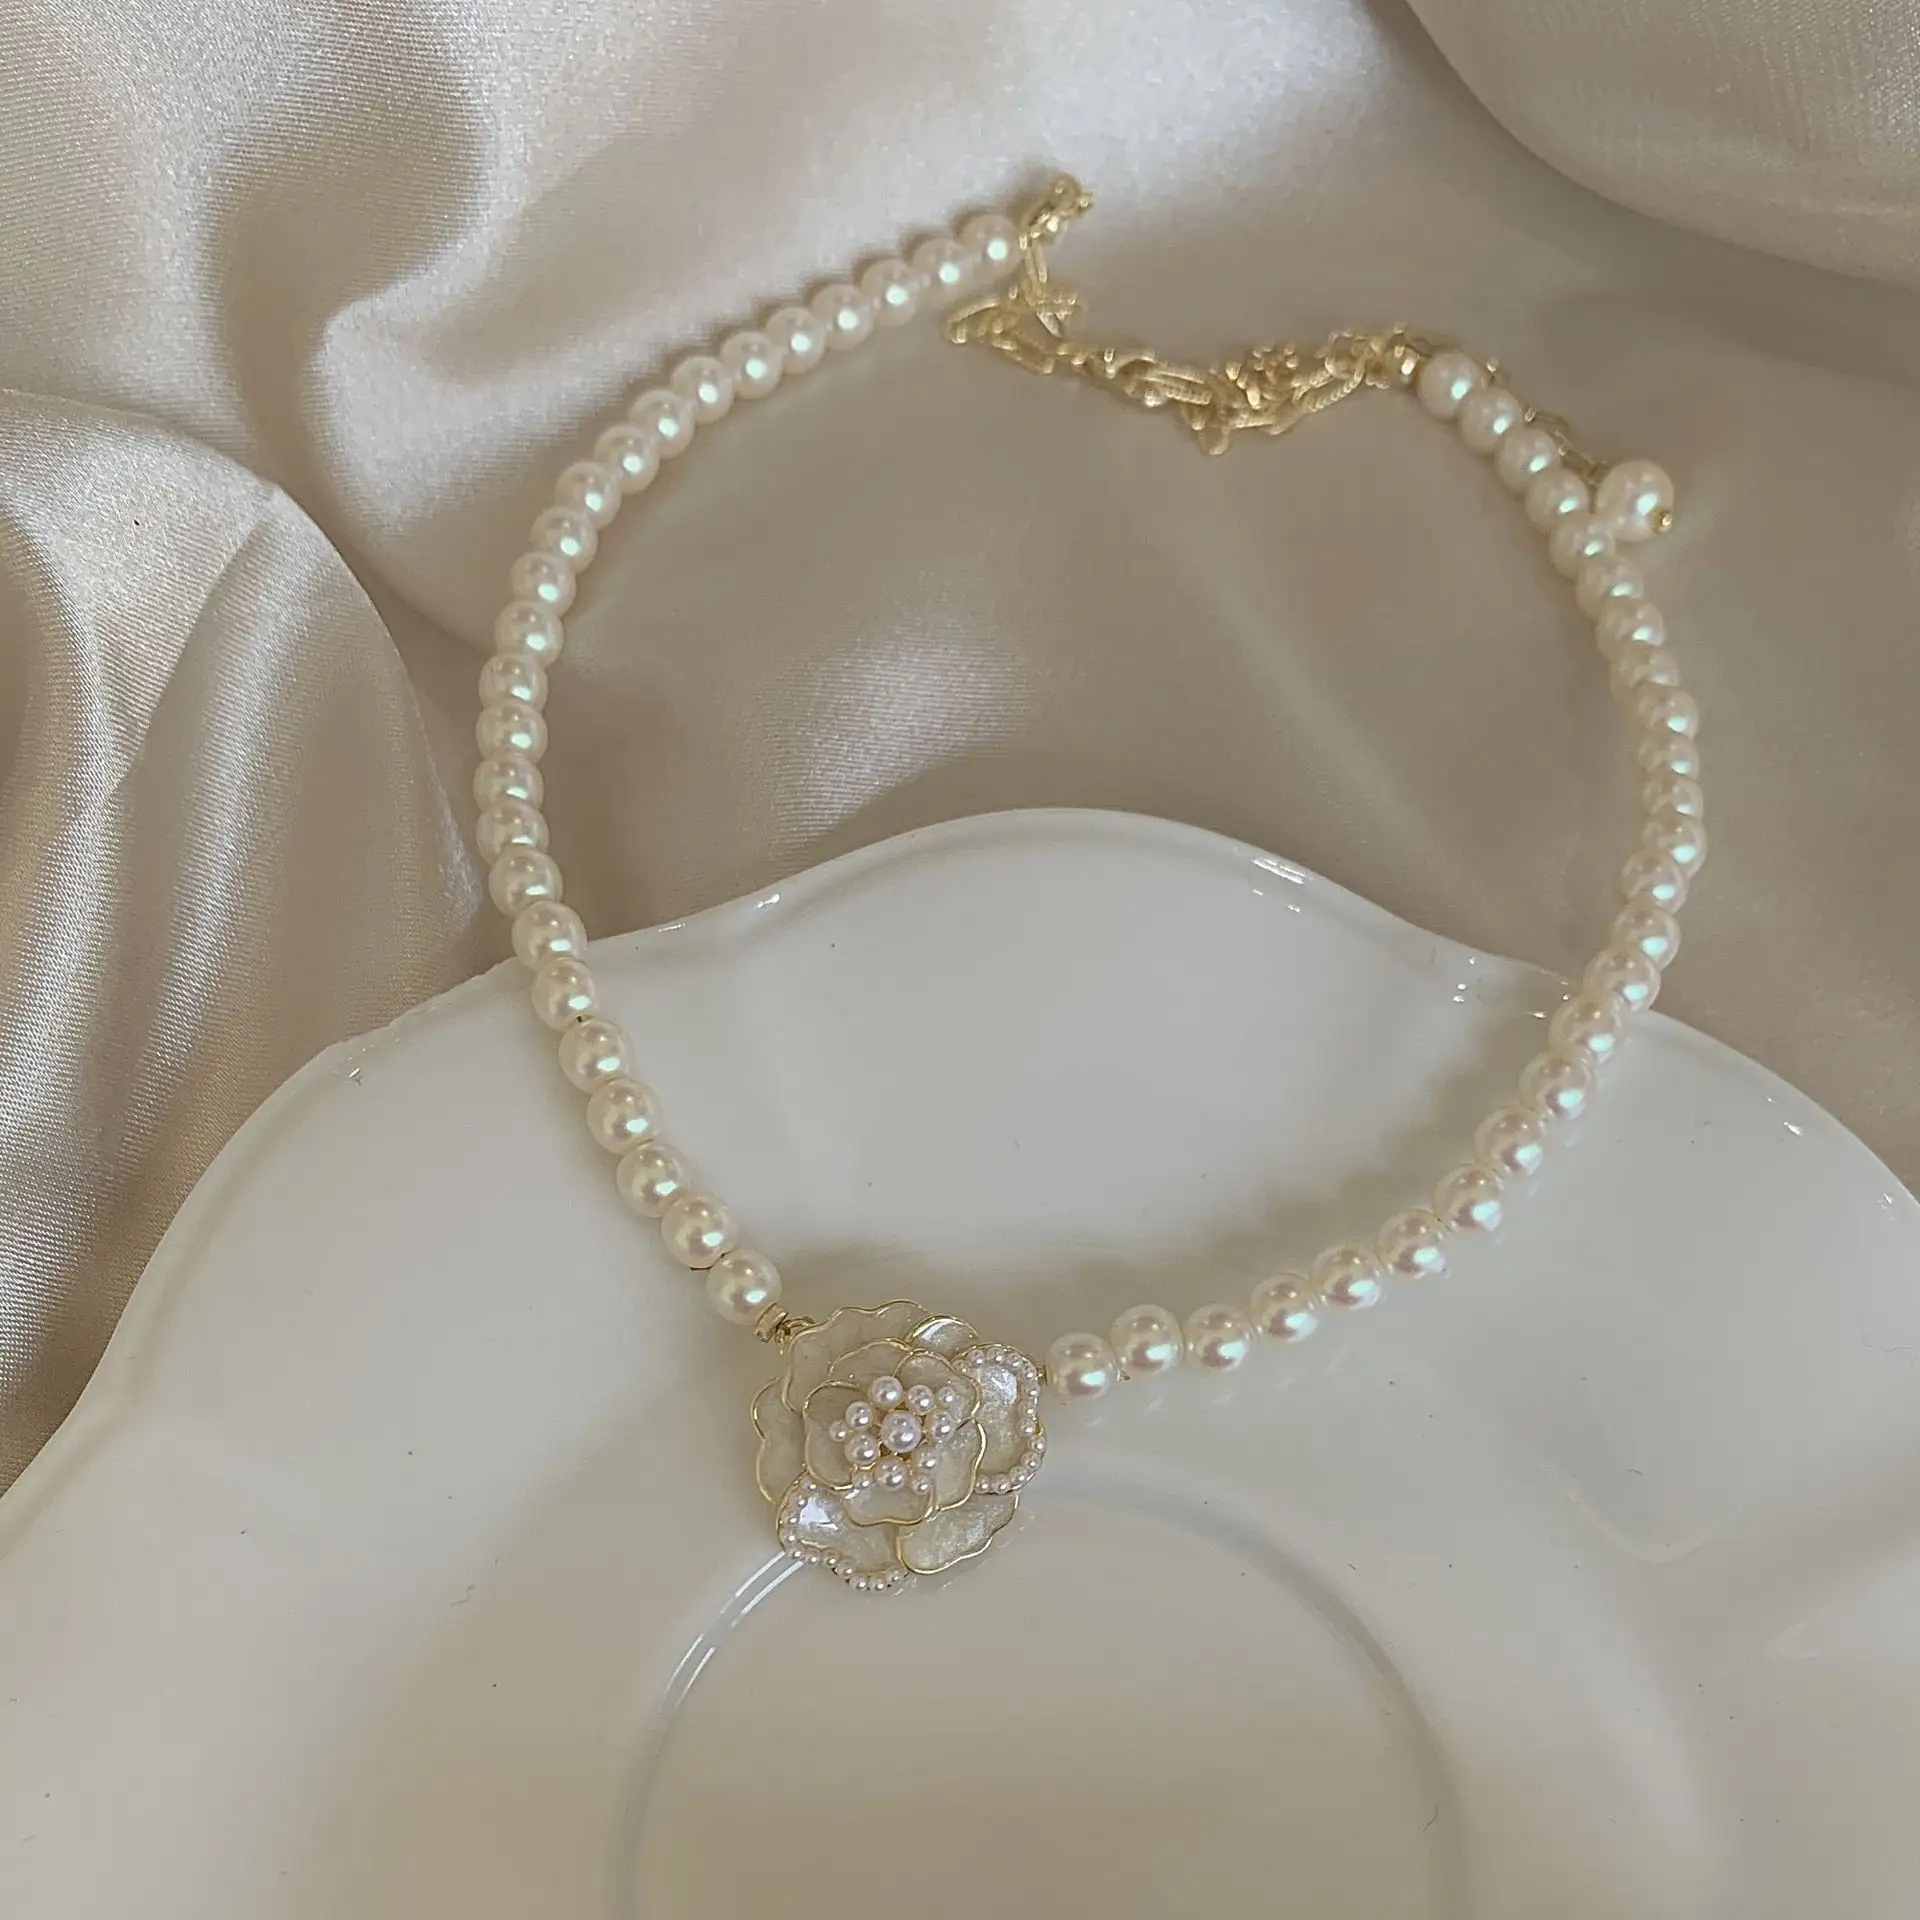 Latest Catalogue Luxury Designer Necklace Camellia Link Chain Baroque Pearl Necklace Chain Collar